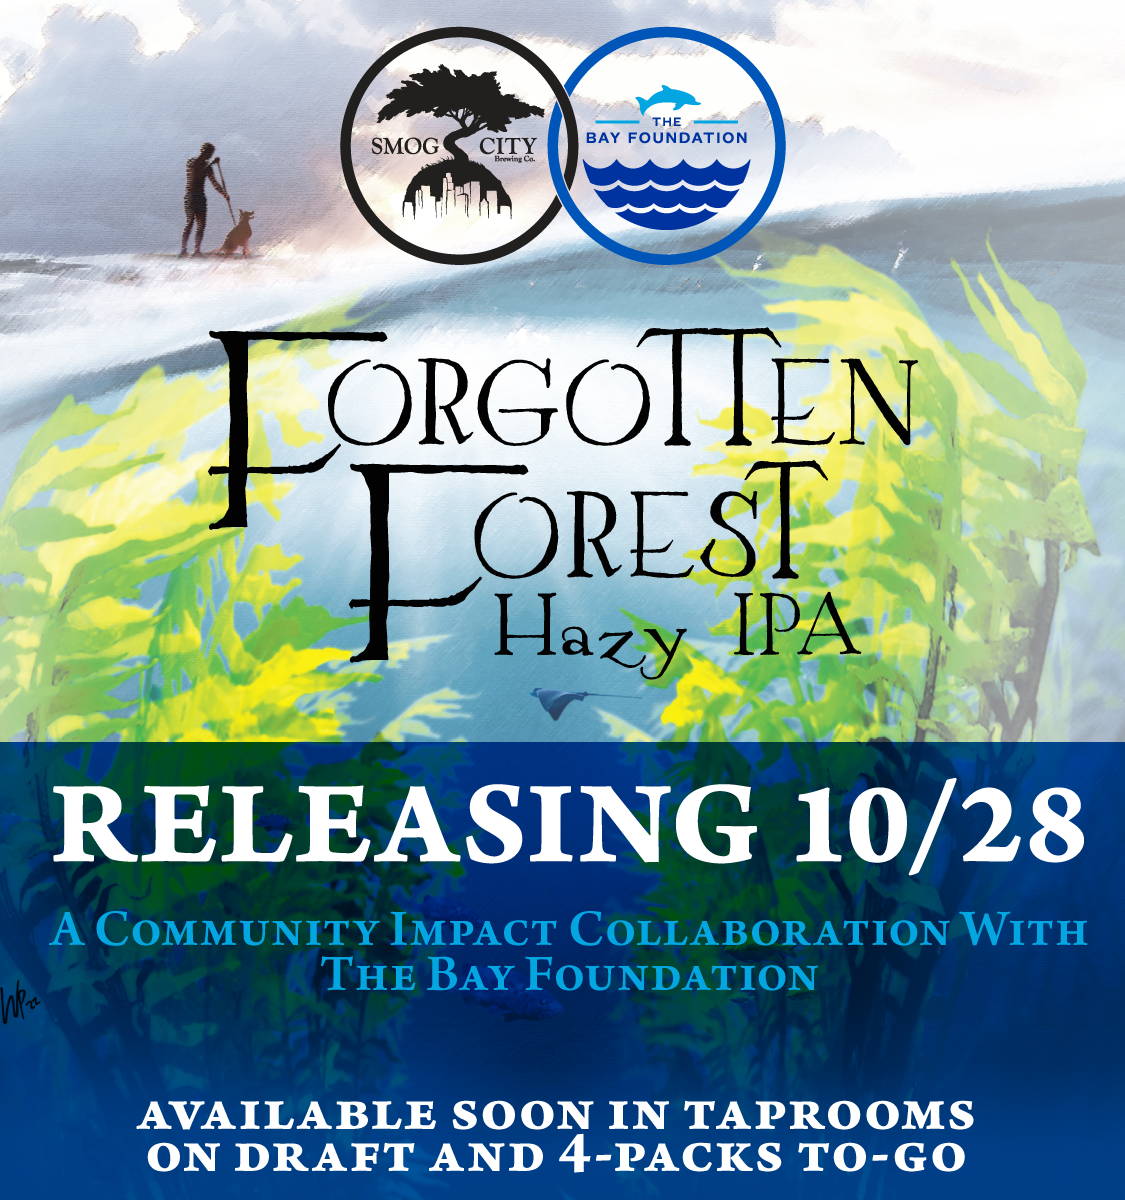 Forgotten Forest Hazy IPA Releasing 10/28, a Community Impact Collaboration With The Bay Foundation